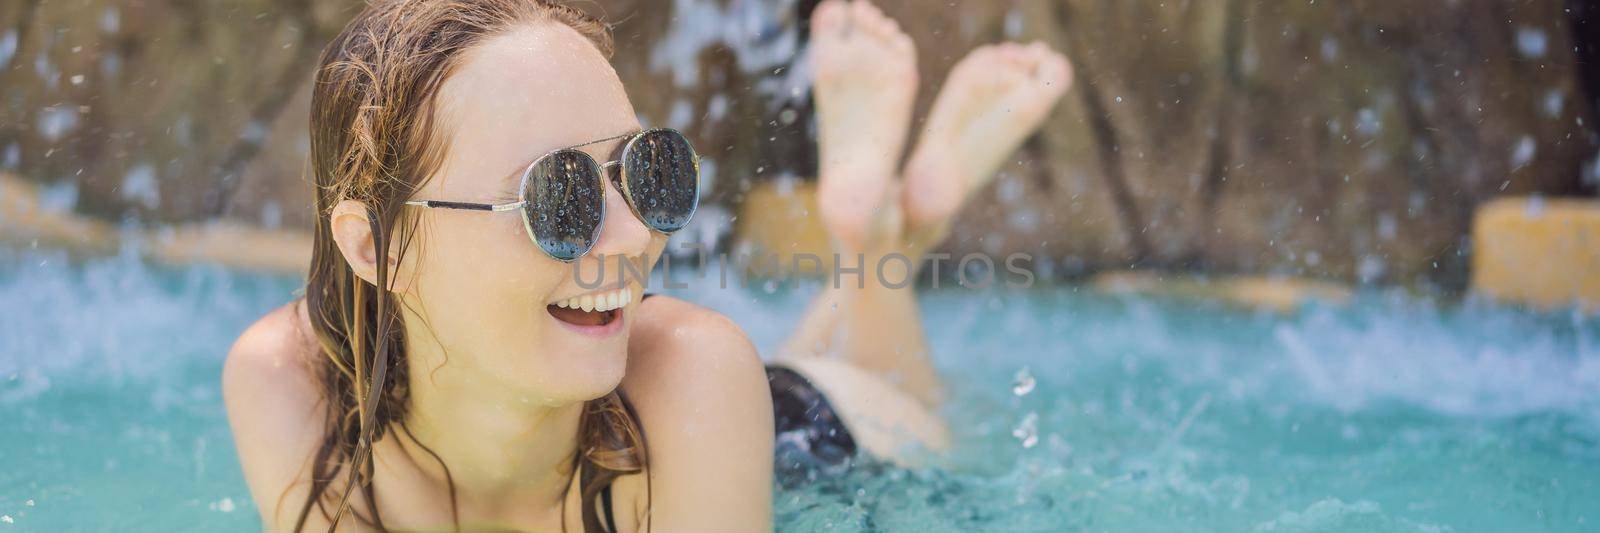 Young joyful woman under the water stream, pool, day spa, hot springs. BANNER, LONG FORMAT